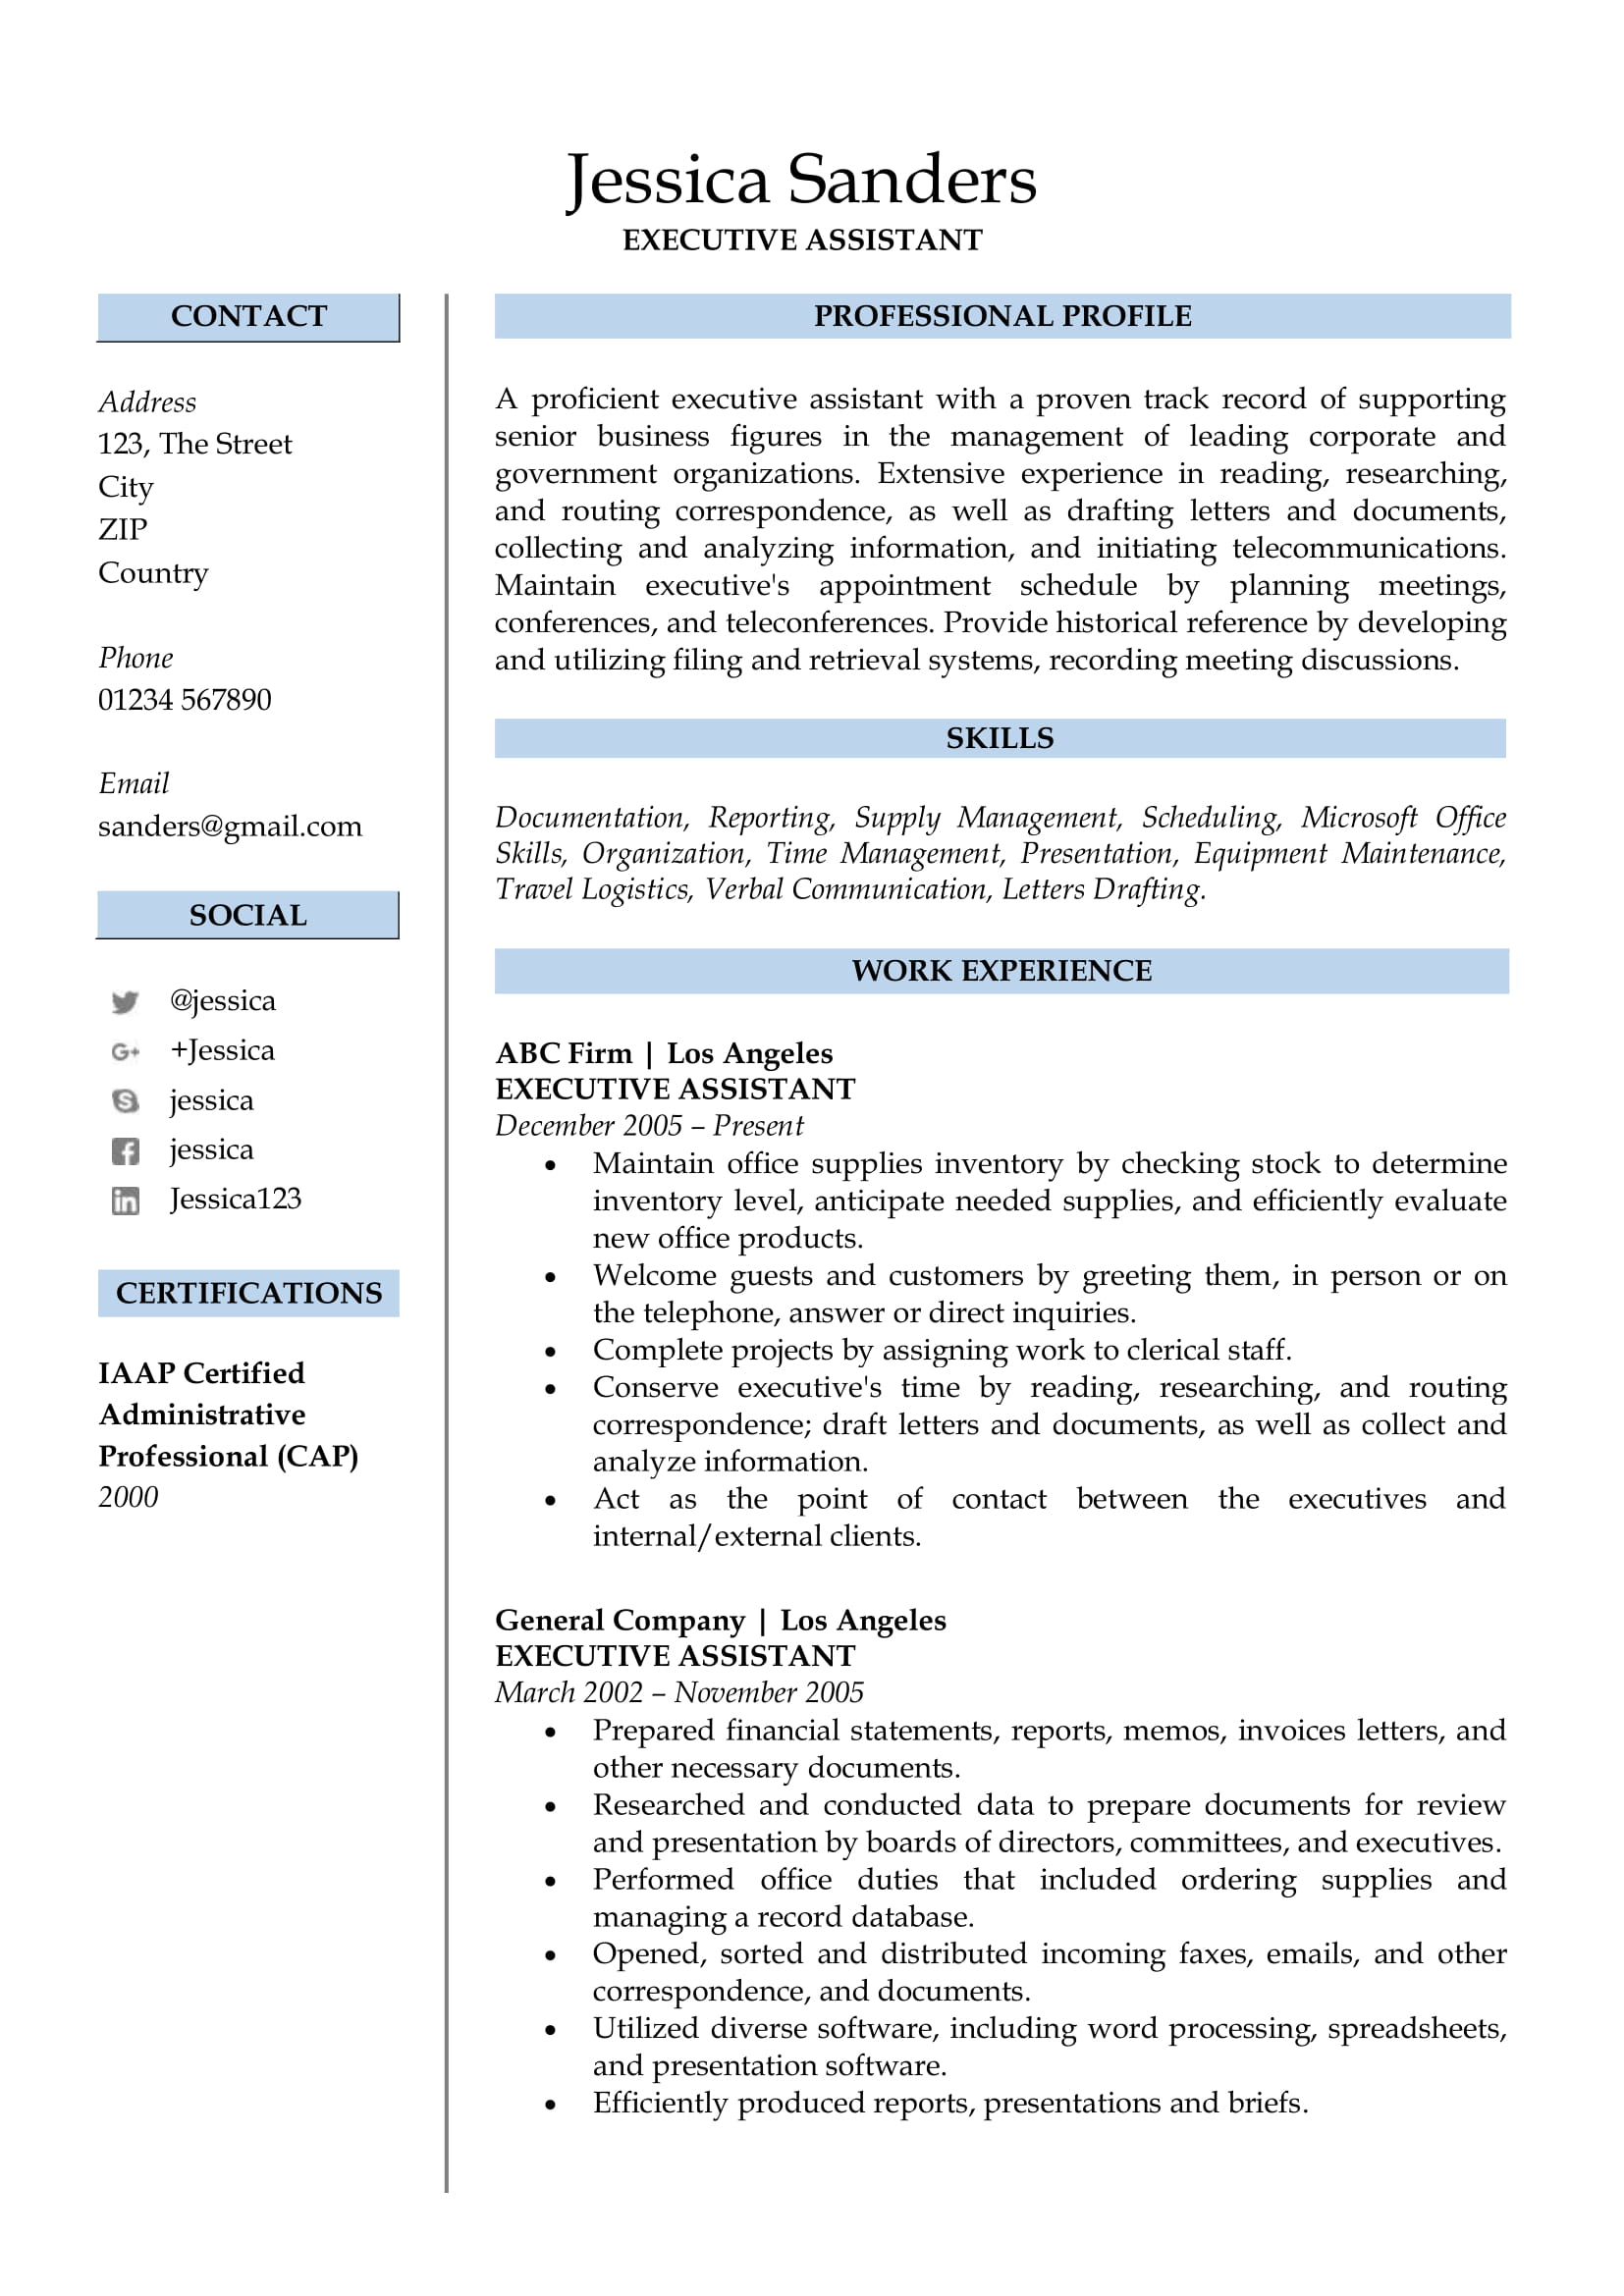 How effective are resume writing services